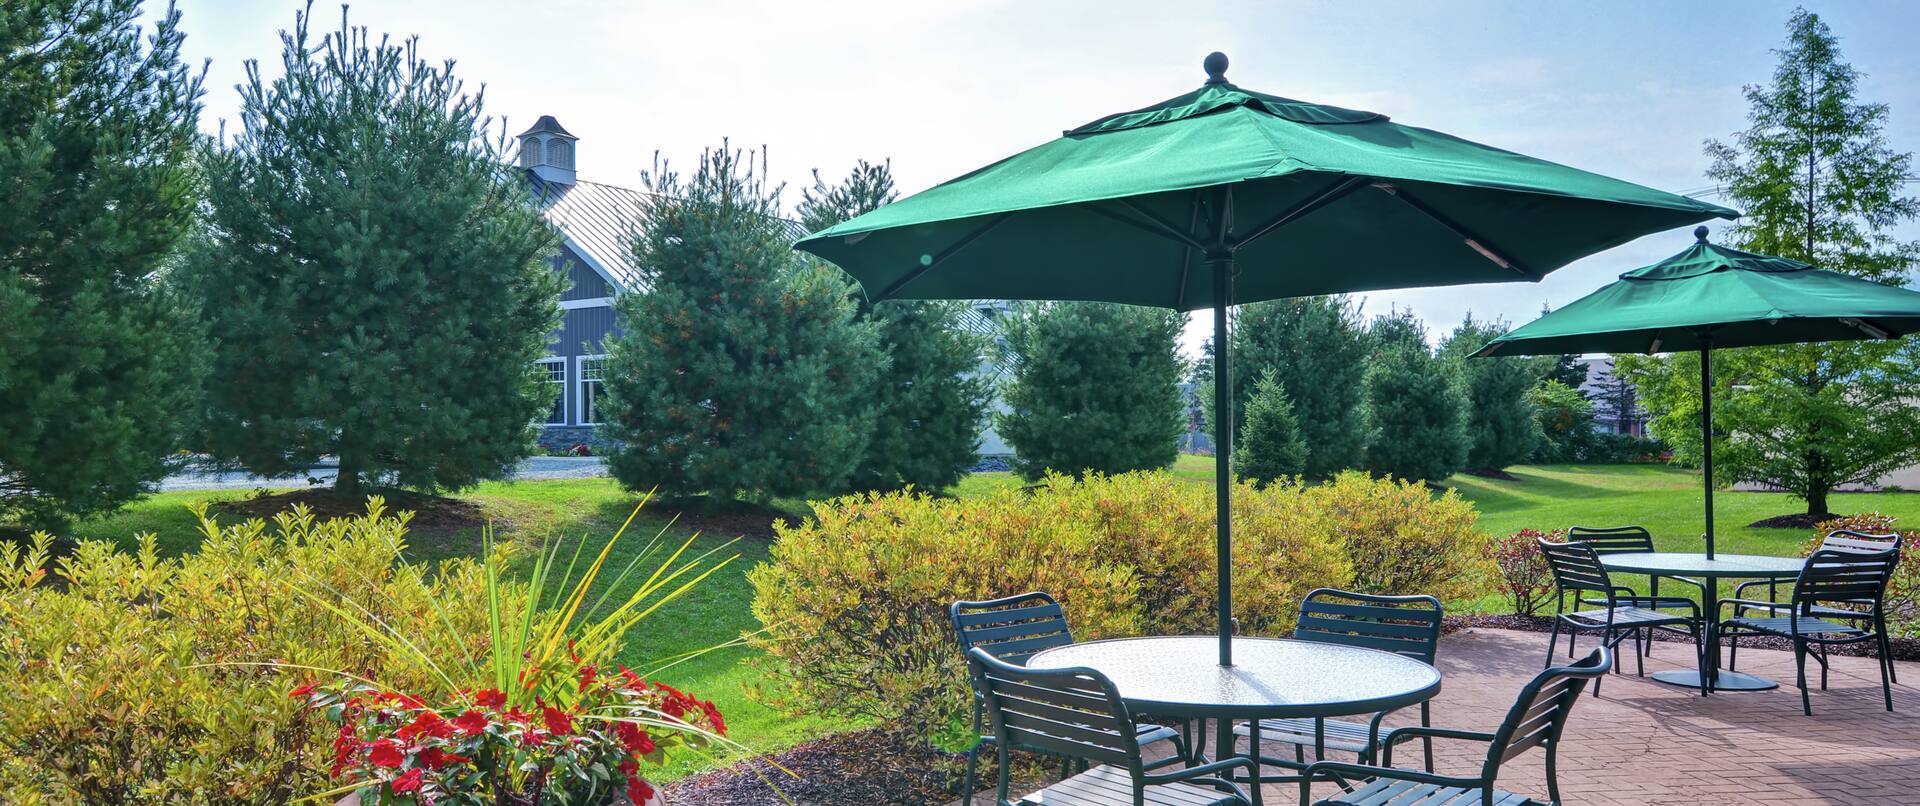 Outdoor Patio with Table and Chairs Covered by Umbrellas